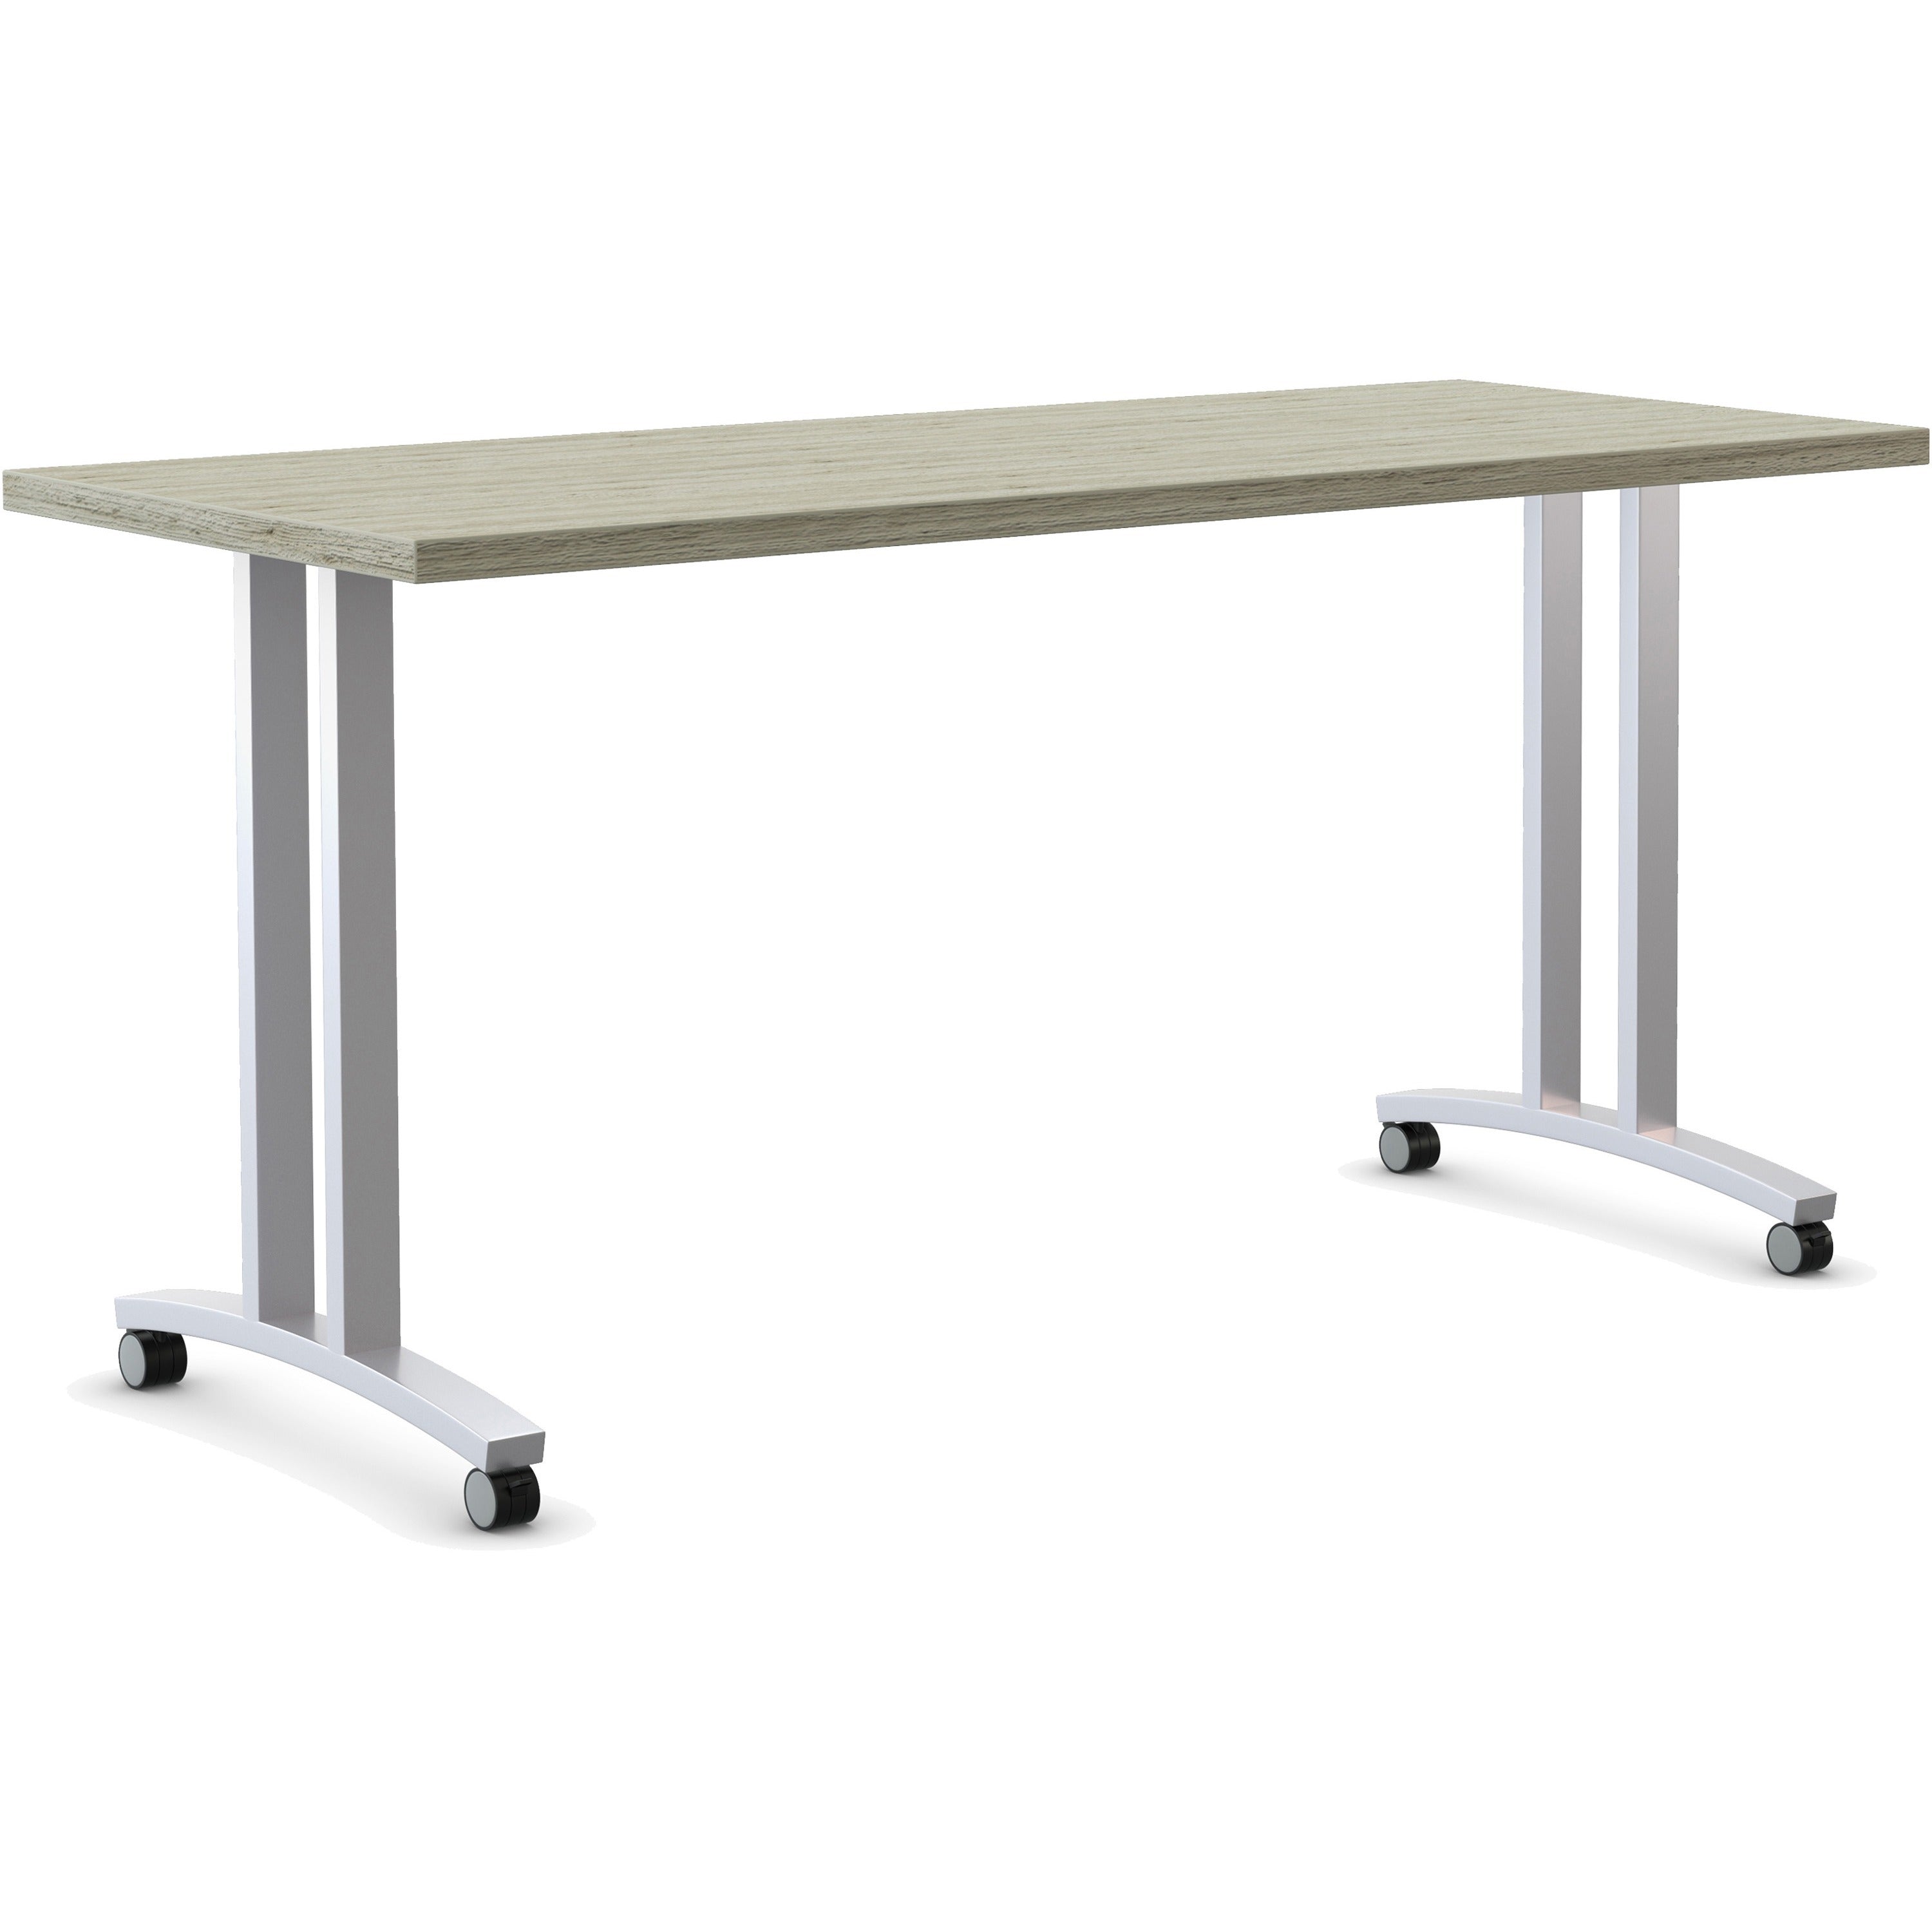 special-t-structure-series-t-leg-table-base-powder-coated-t-shaped-metallic-silver-base-2-legs-112-lb-capacity-assembly-required-1-set_sctrs2t24c2 - 1